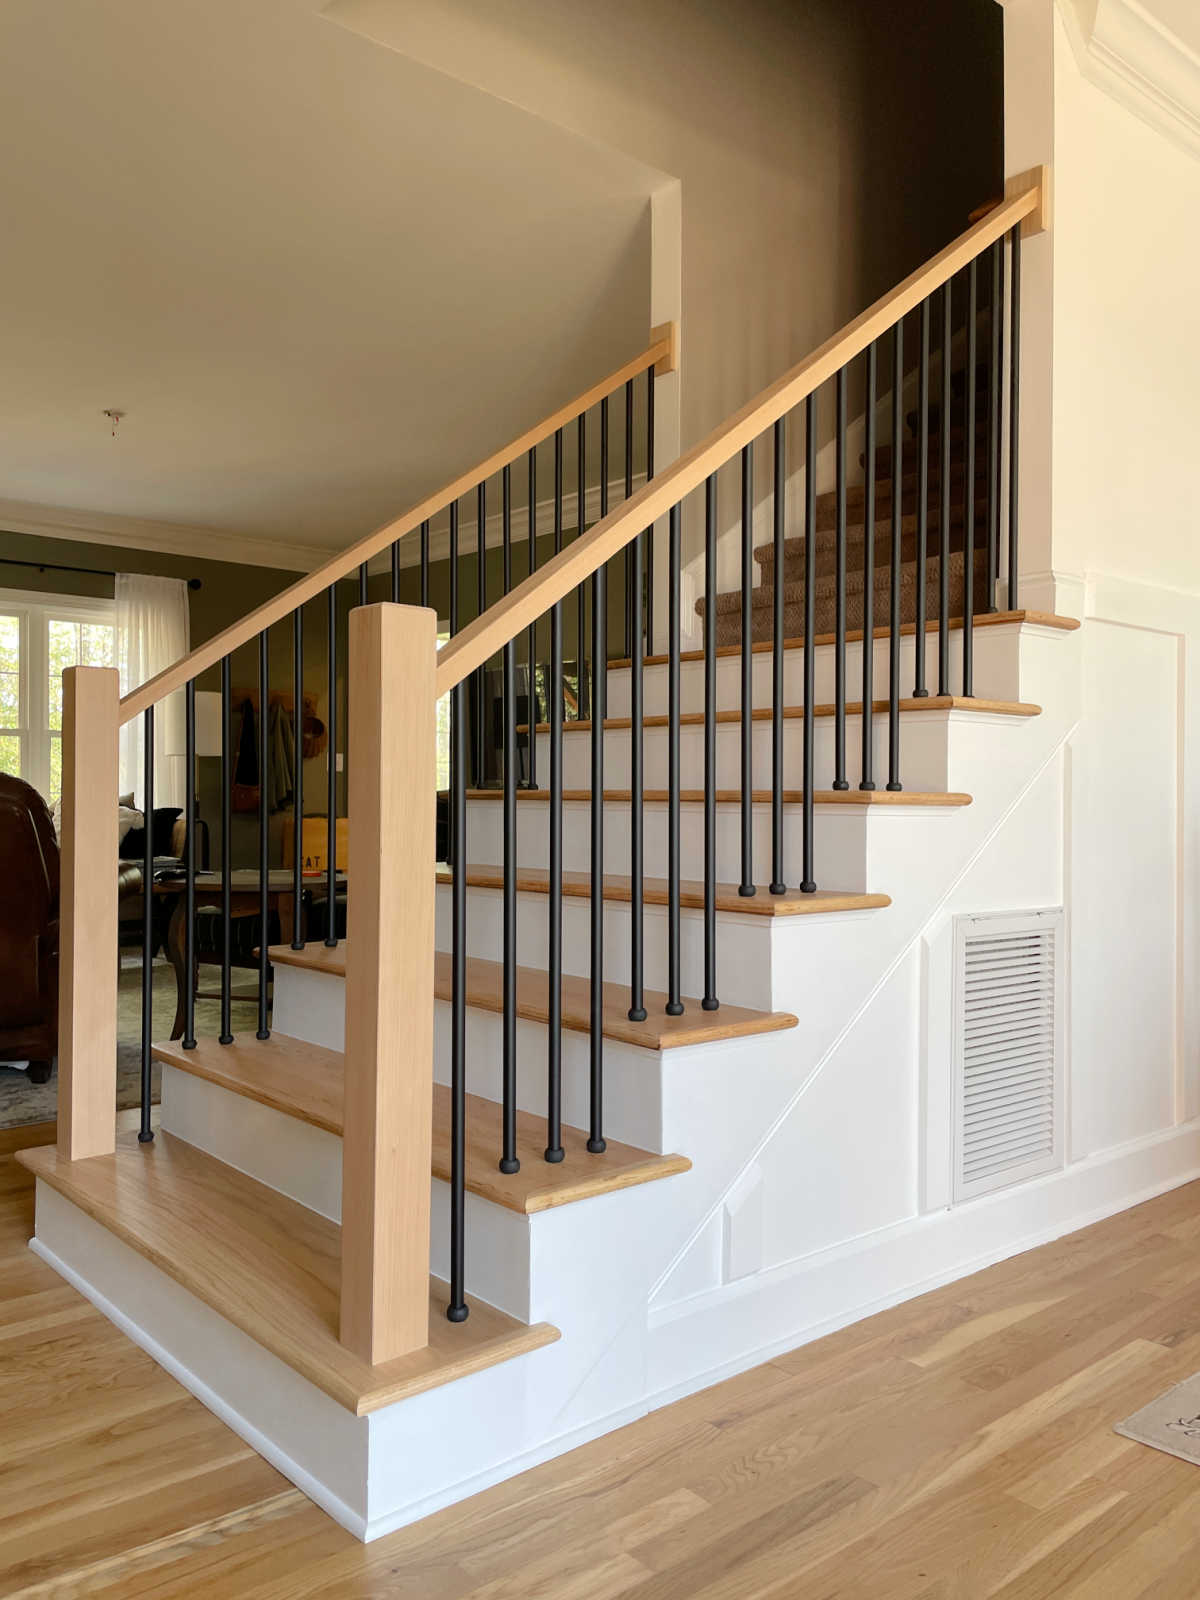 Staircase Makeover - At Home With The Barkers